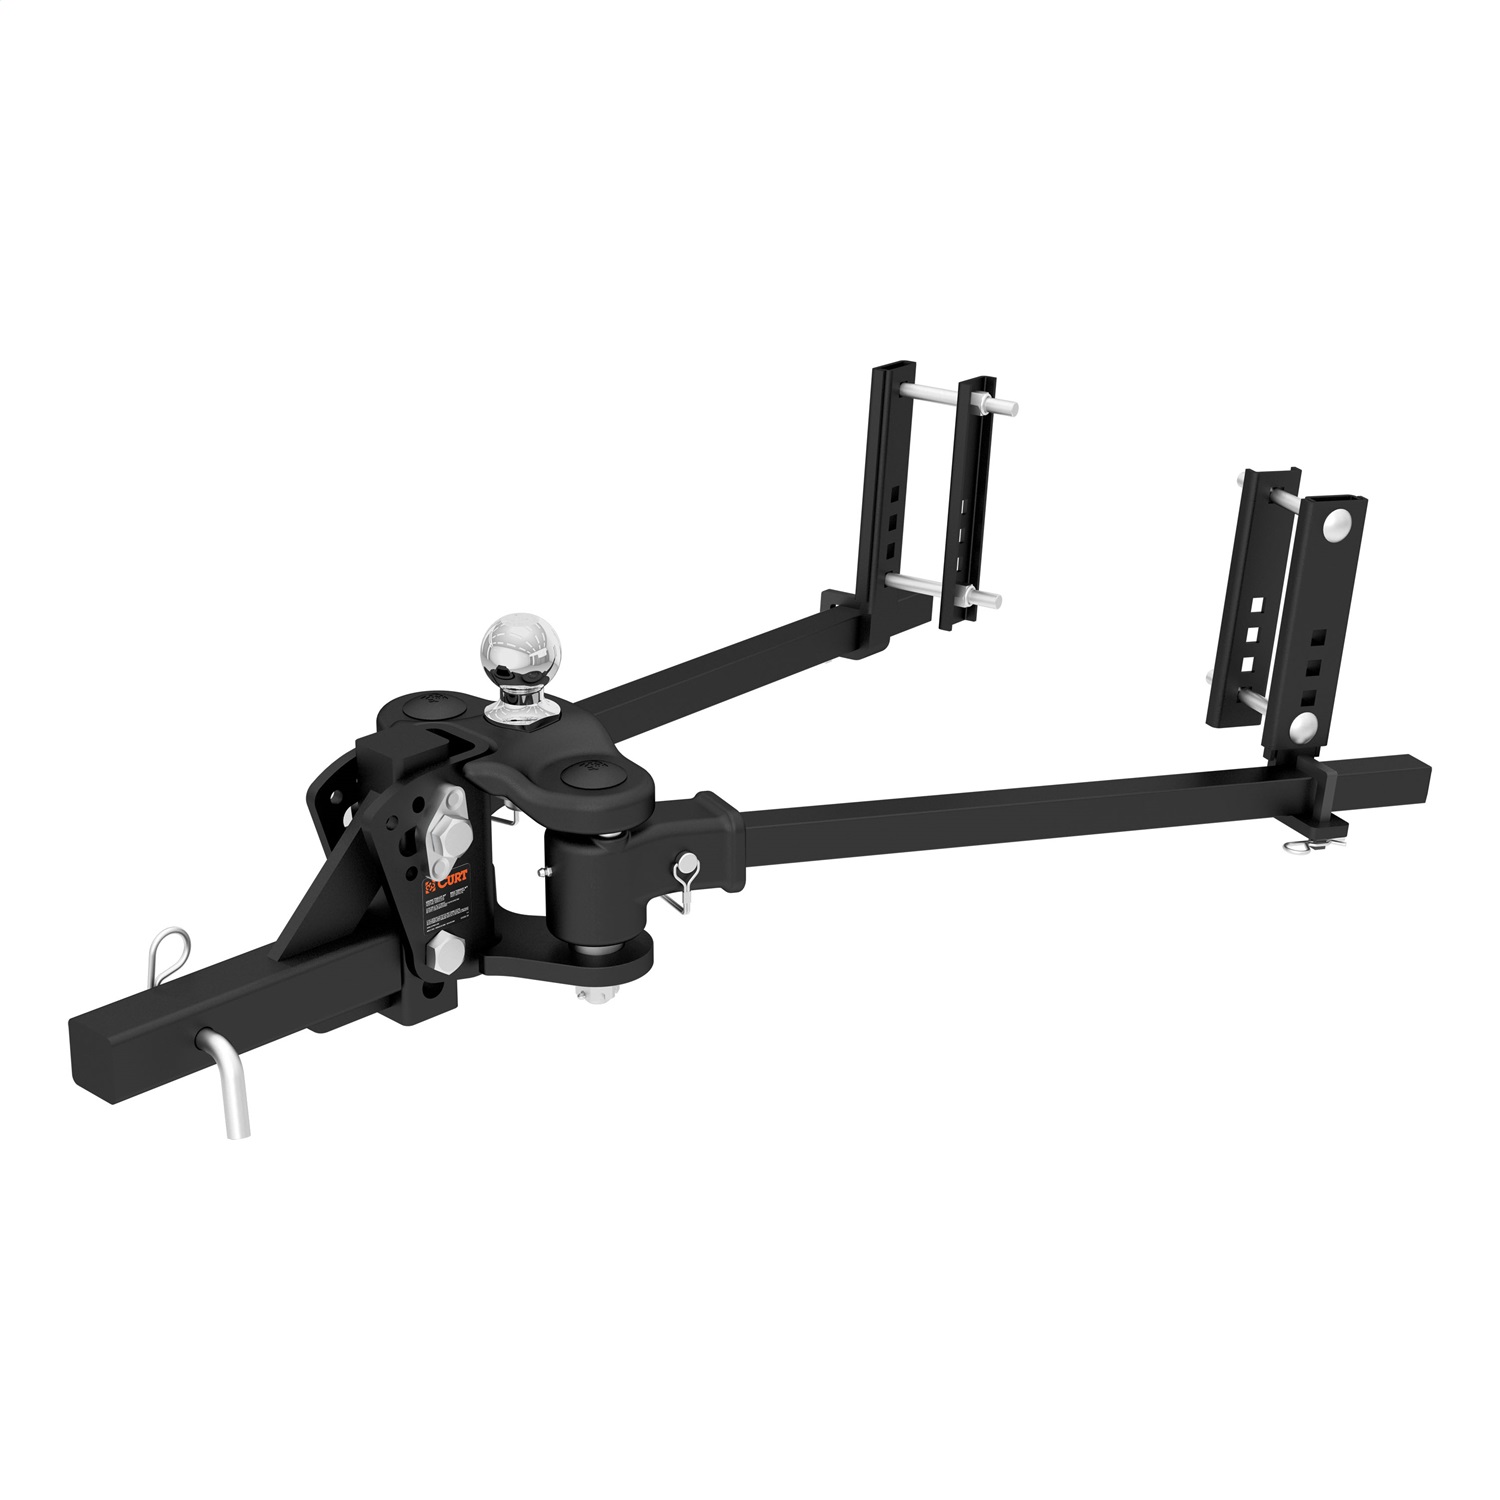 CURT Manufacturing CURT Manufacturing 17500 Weight Distribution Hitch; Trunion Spring Bar  Fits